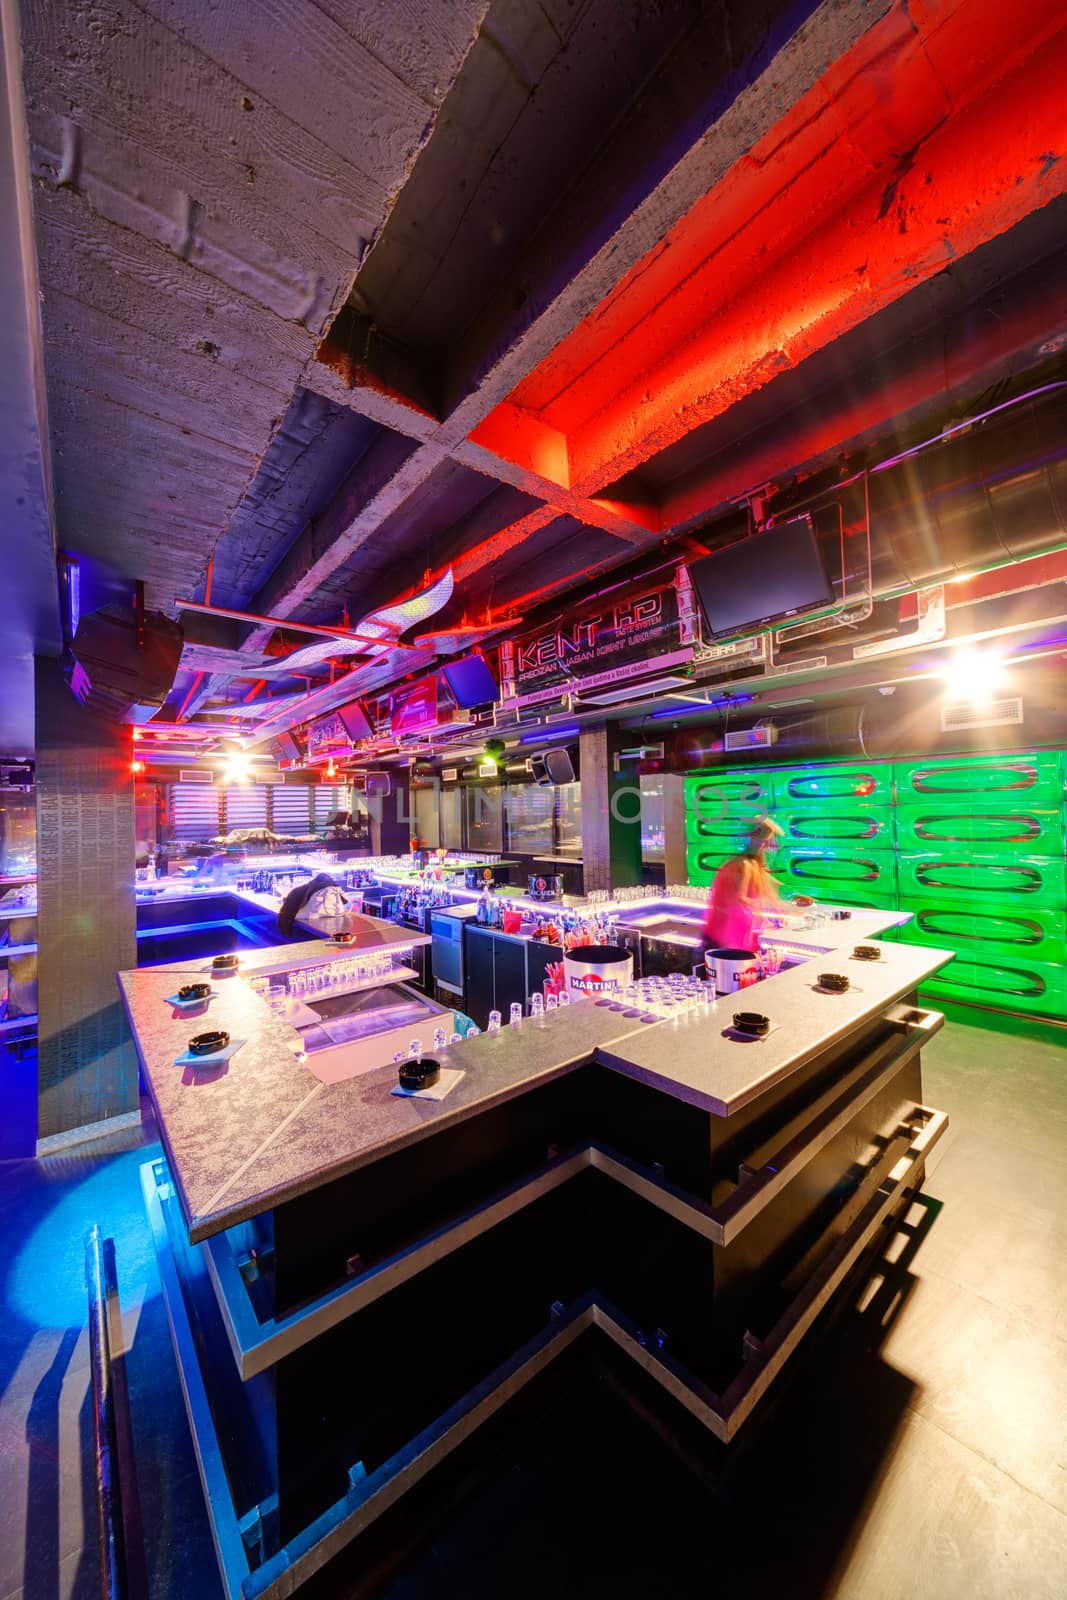 Interior of  night club with vivid colors